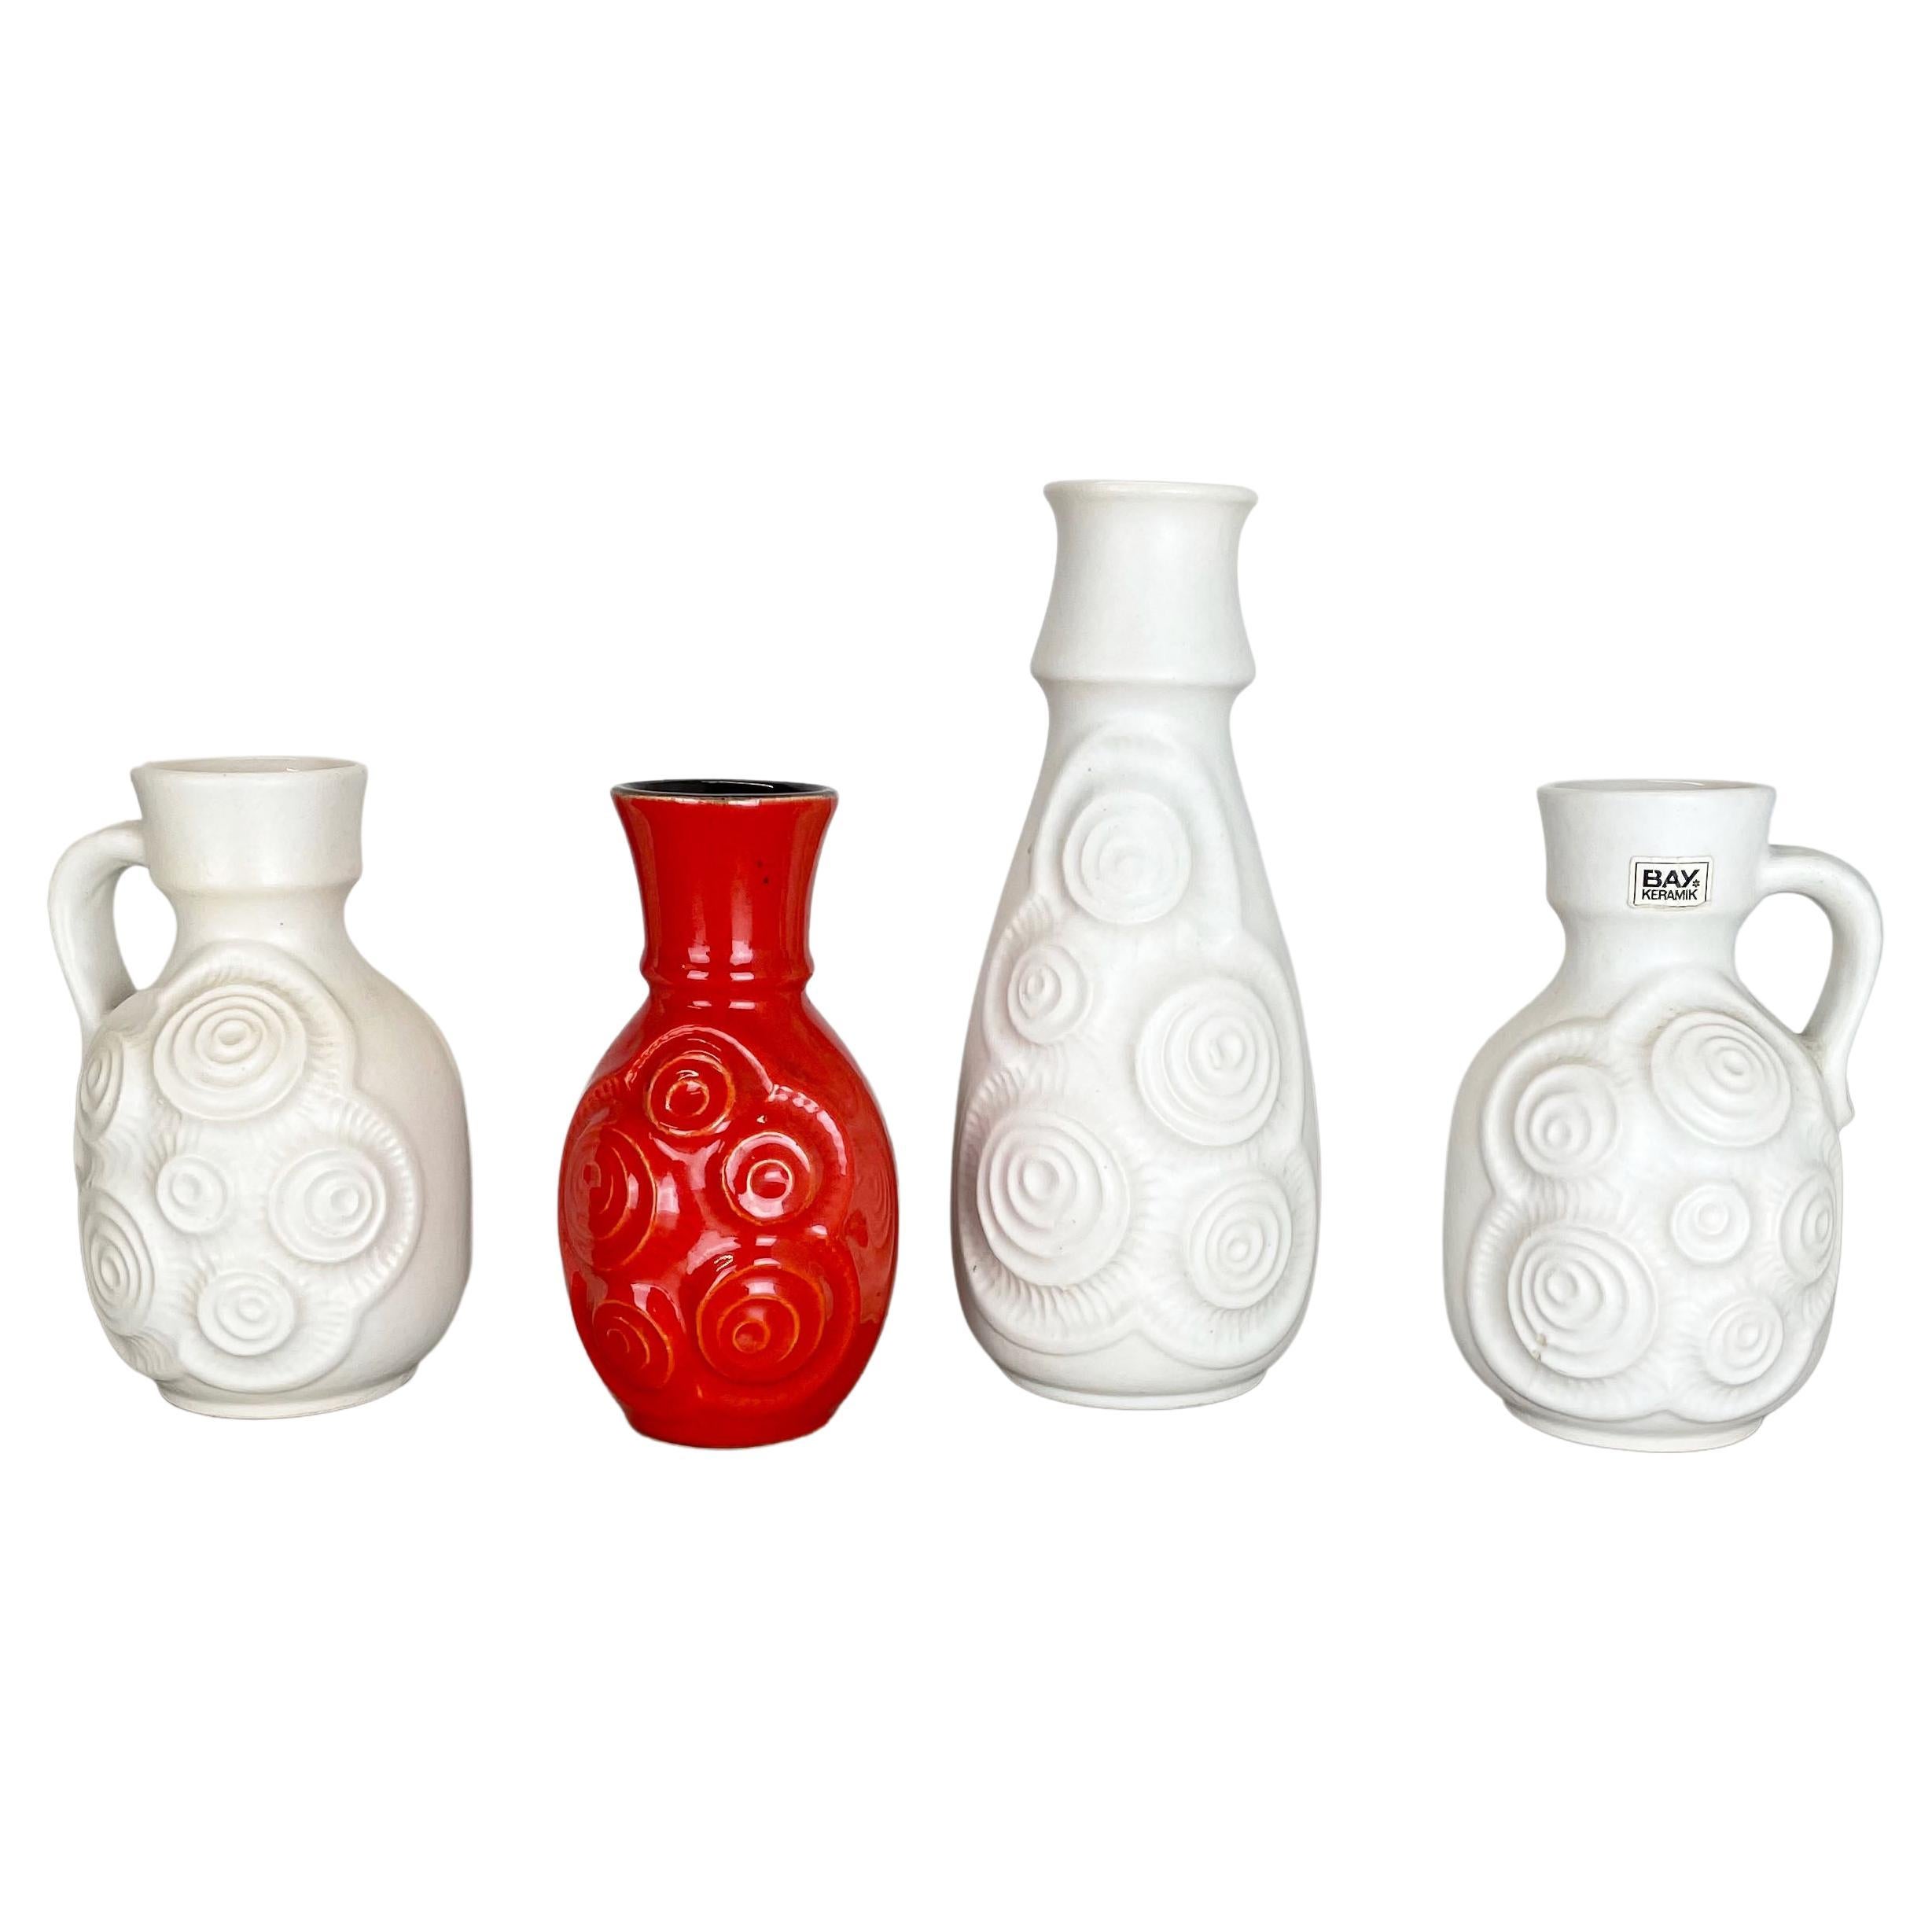 Set of 4 Red-White Fat Lava Op Art Pottery Vases by Bay Ceramics, Germany For Sale